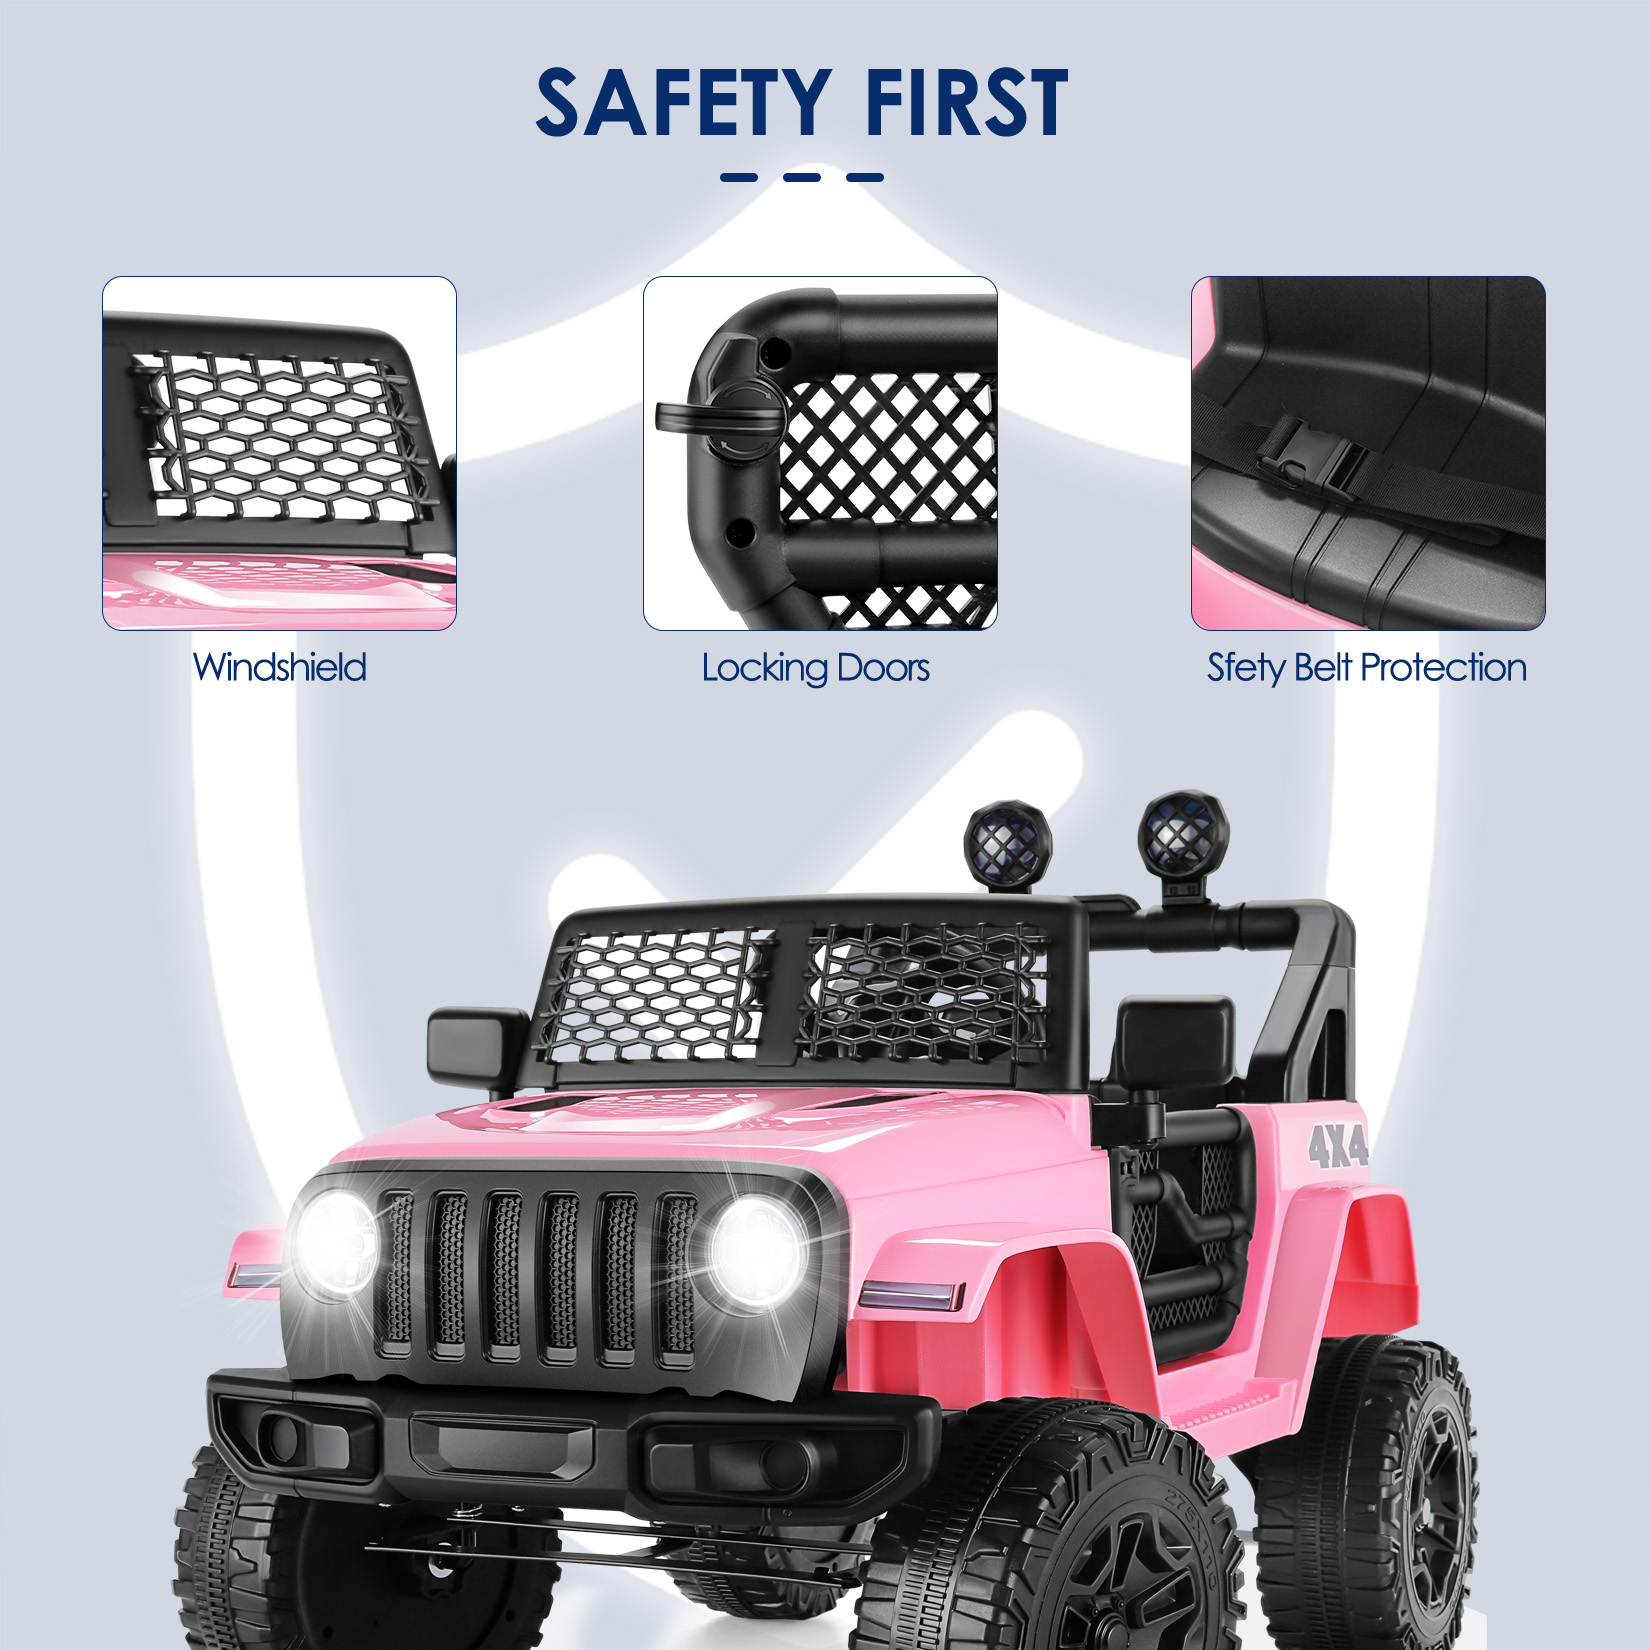 Funcid 12V 7AH Kids Powered Ride on Truck Car with Parent Remote Control, Bluetooth Music, Spring Suspension, LED Lights - Pink - image 5 of 11